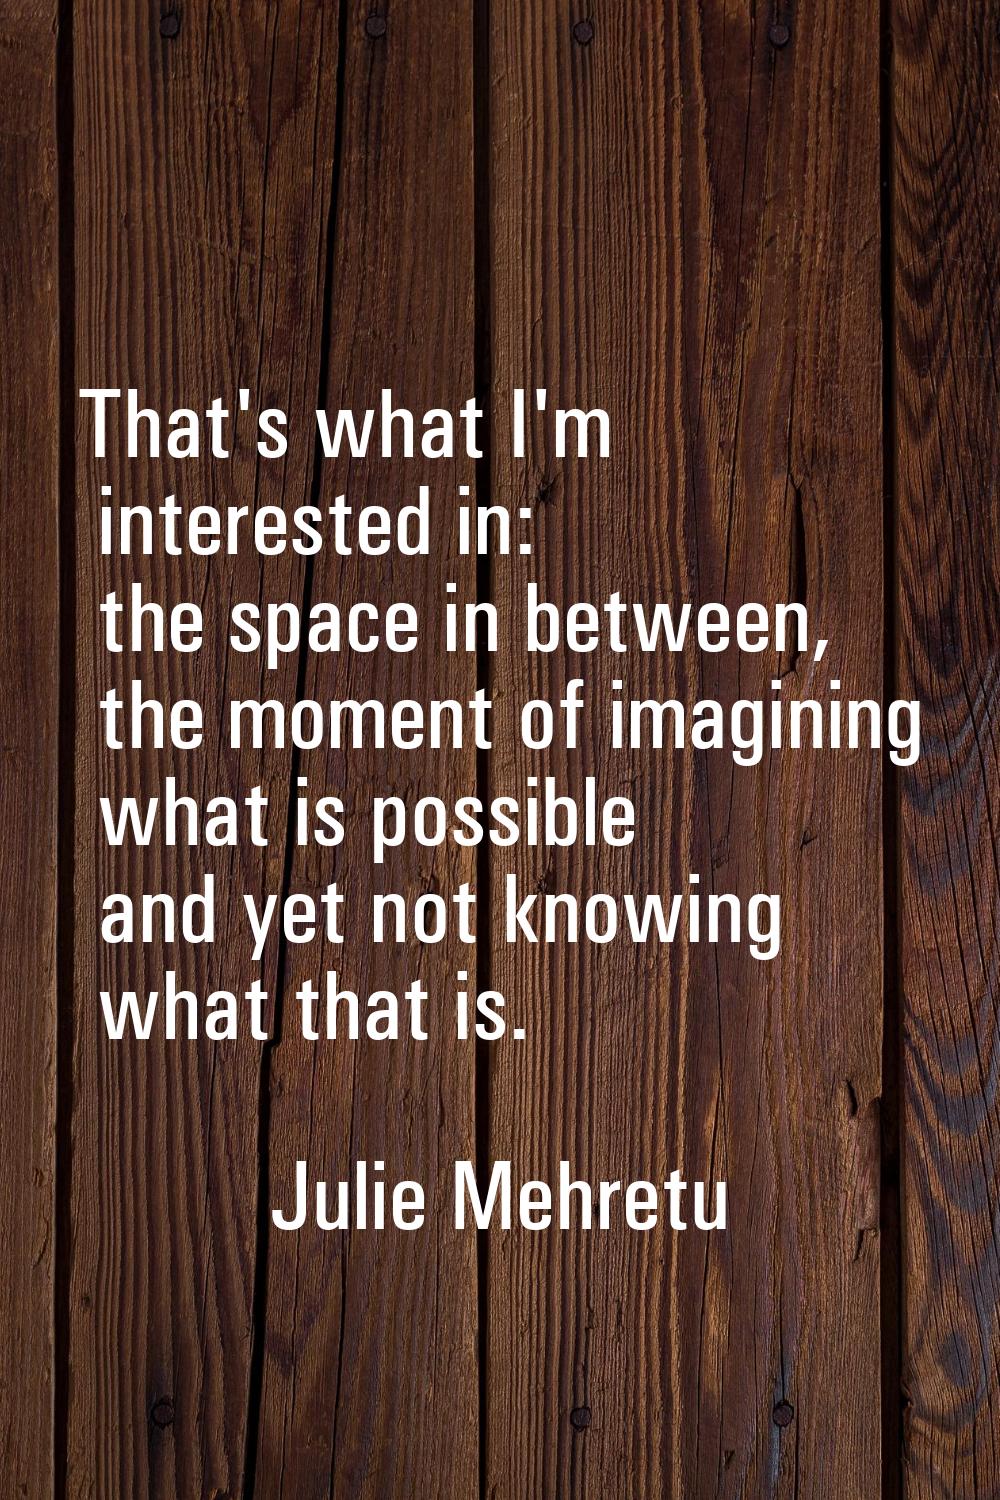 That's what I'm interested in: the space in between, the moment of imagining what is possible and y